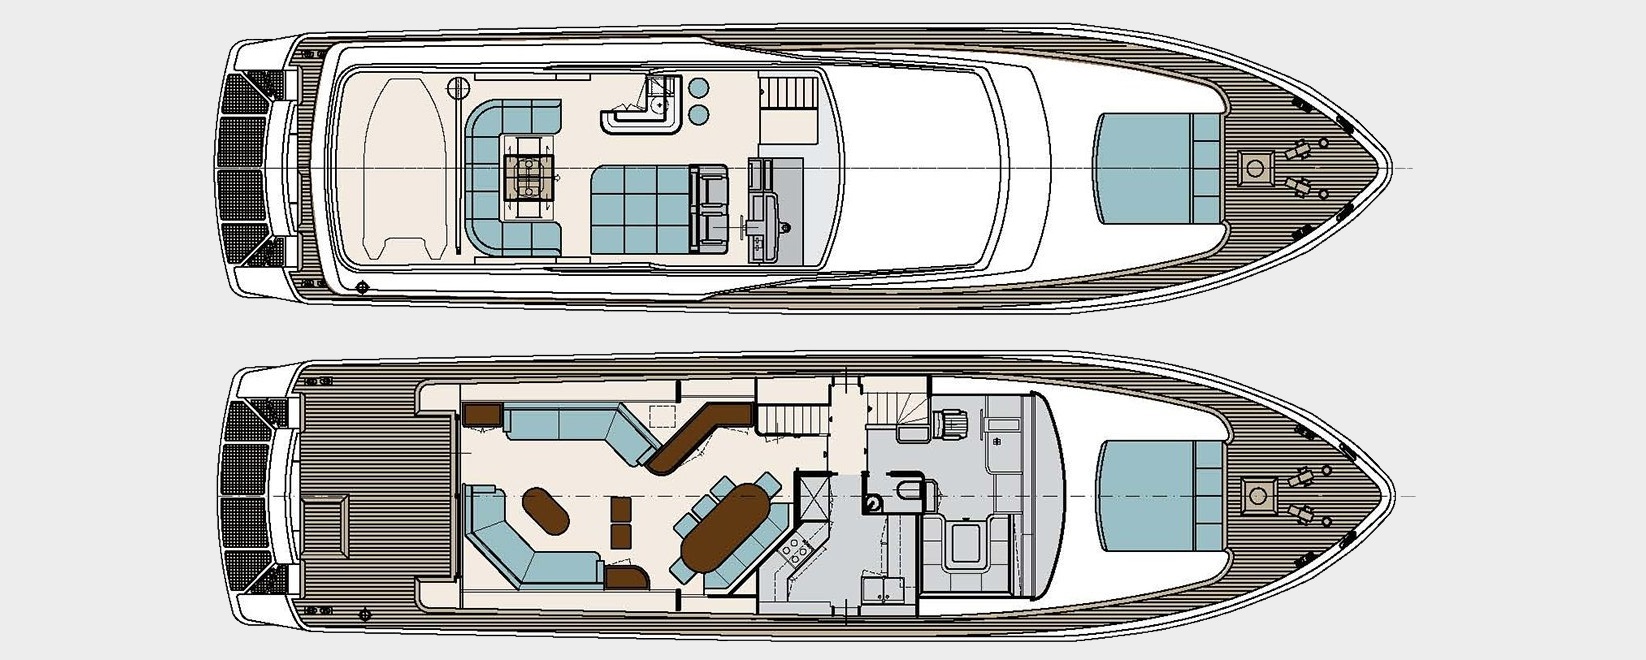 solal yacht charter layout